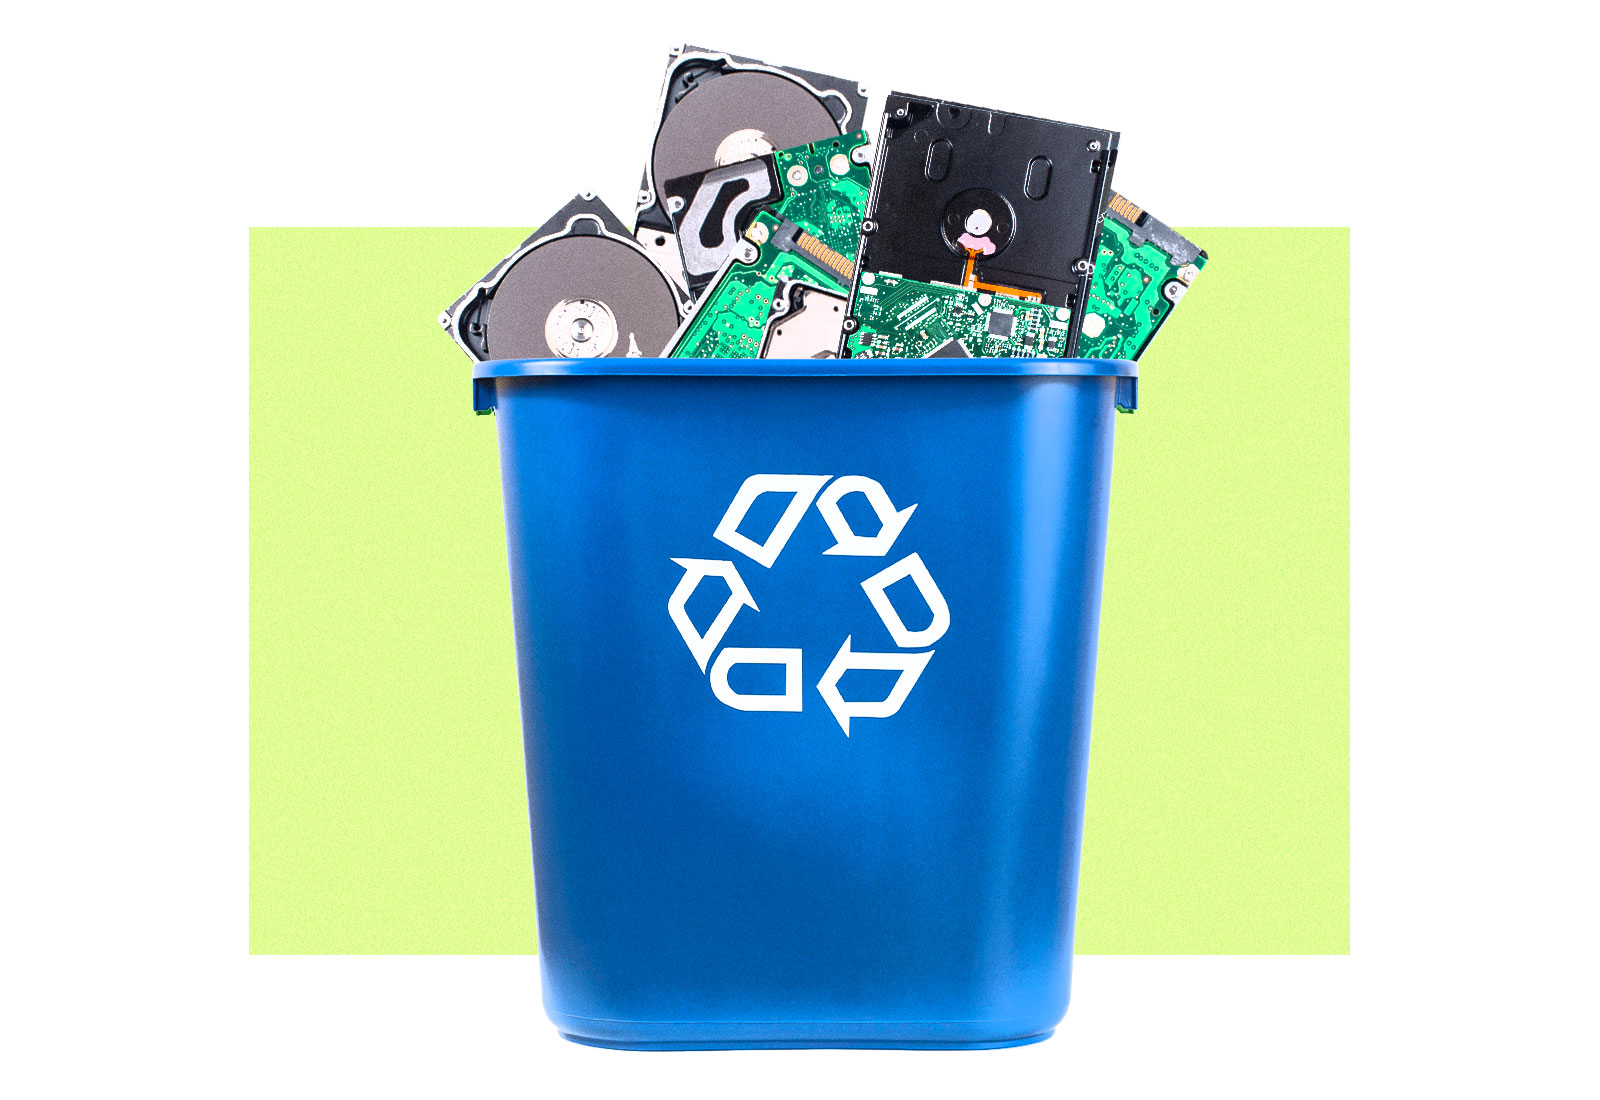 Collage: a recycling bin overflowing with hard drives